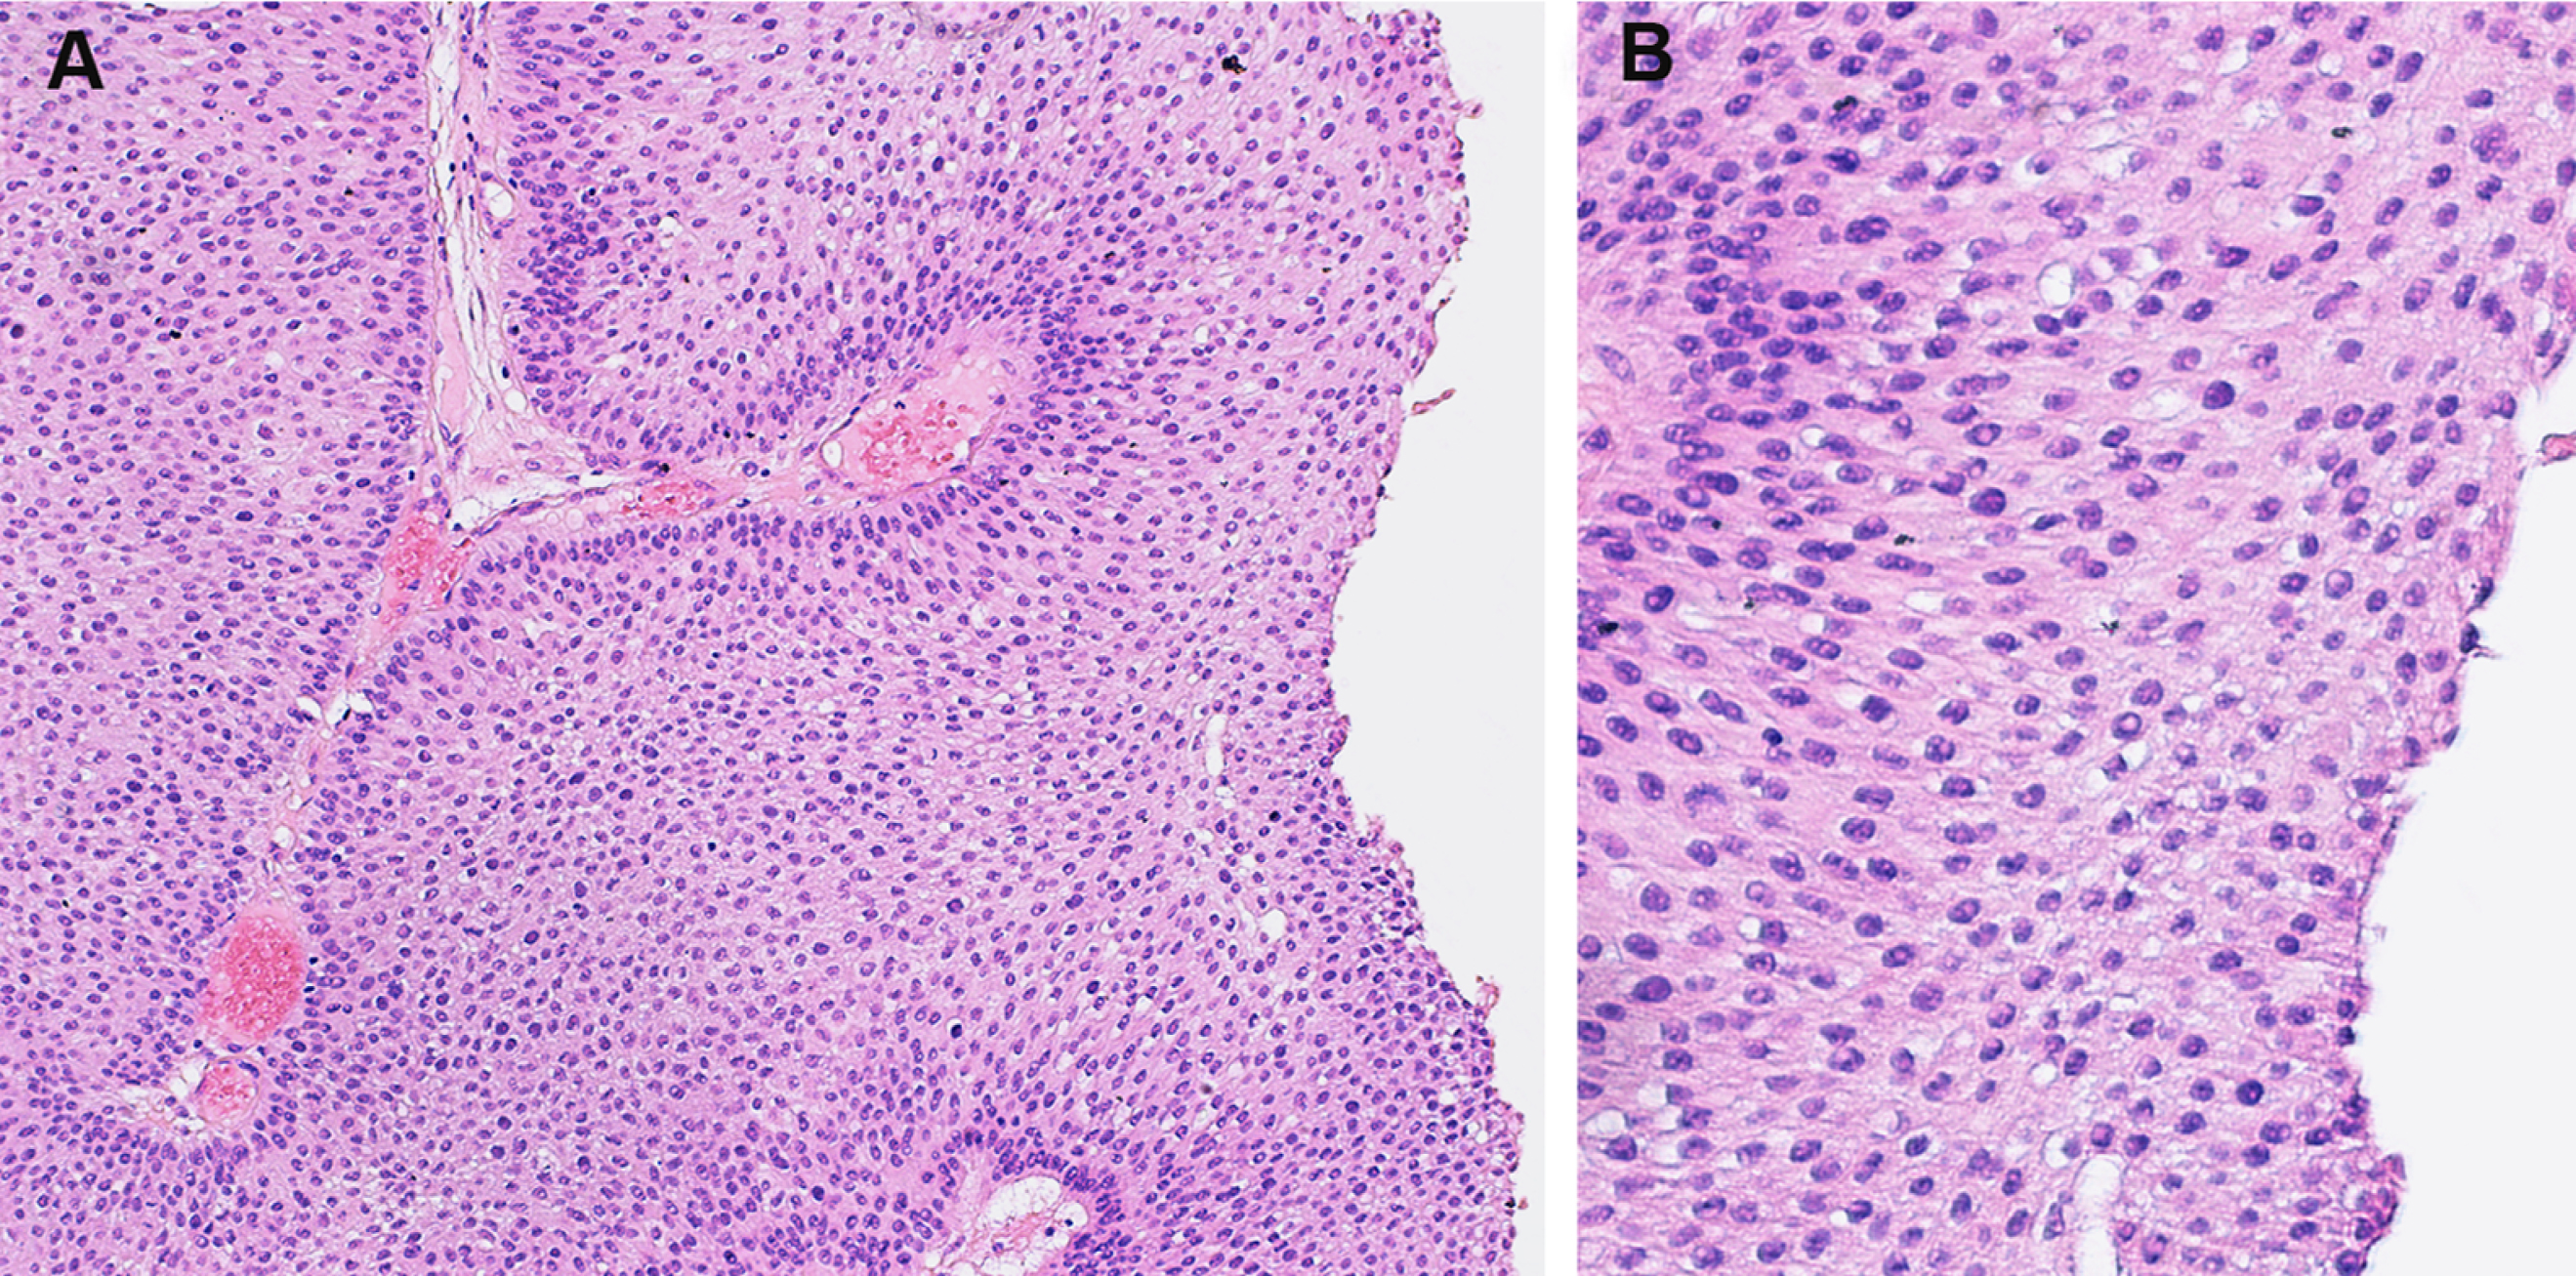 Papillary urothelial neoplasm of low malignant potential. A. The overlying urothelium is thickened (×100). B. The urothelium shows minimal cytologic atypia (×200).